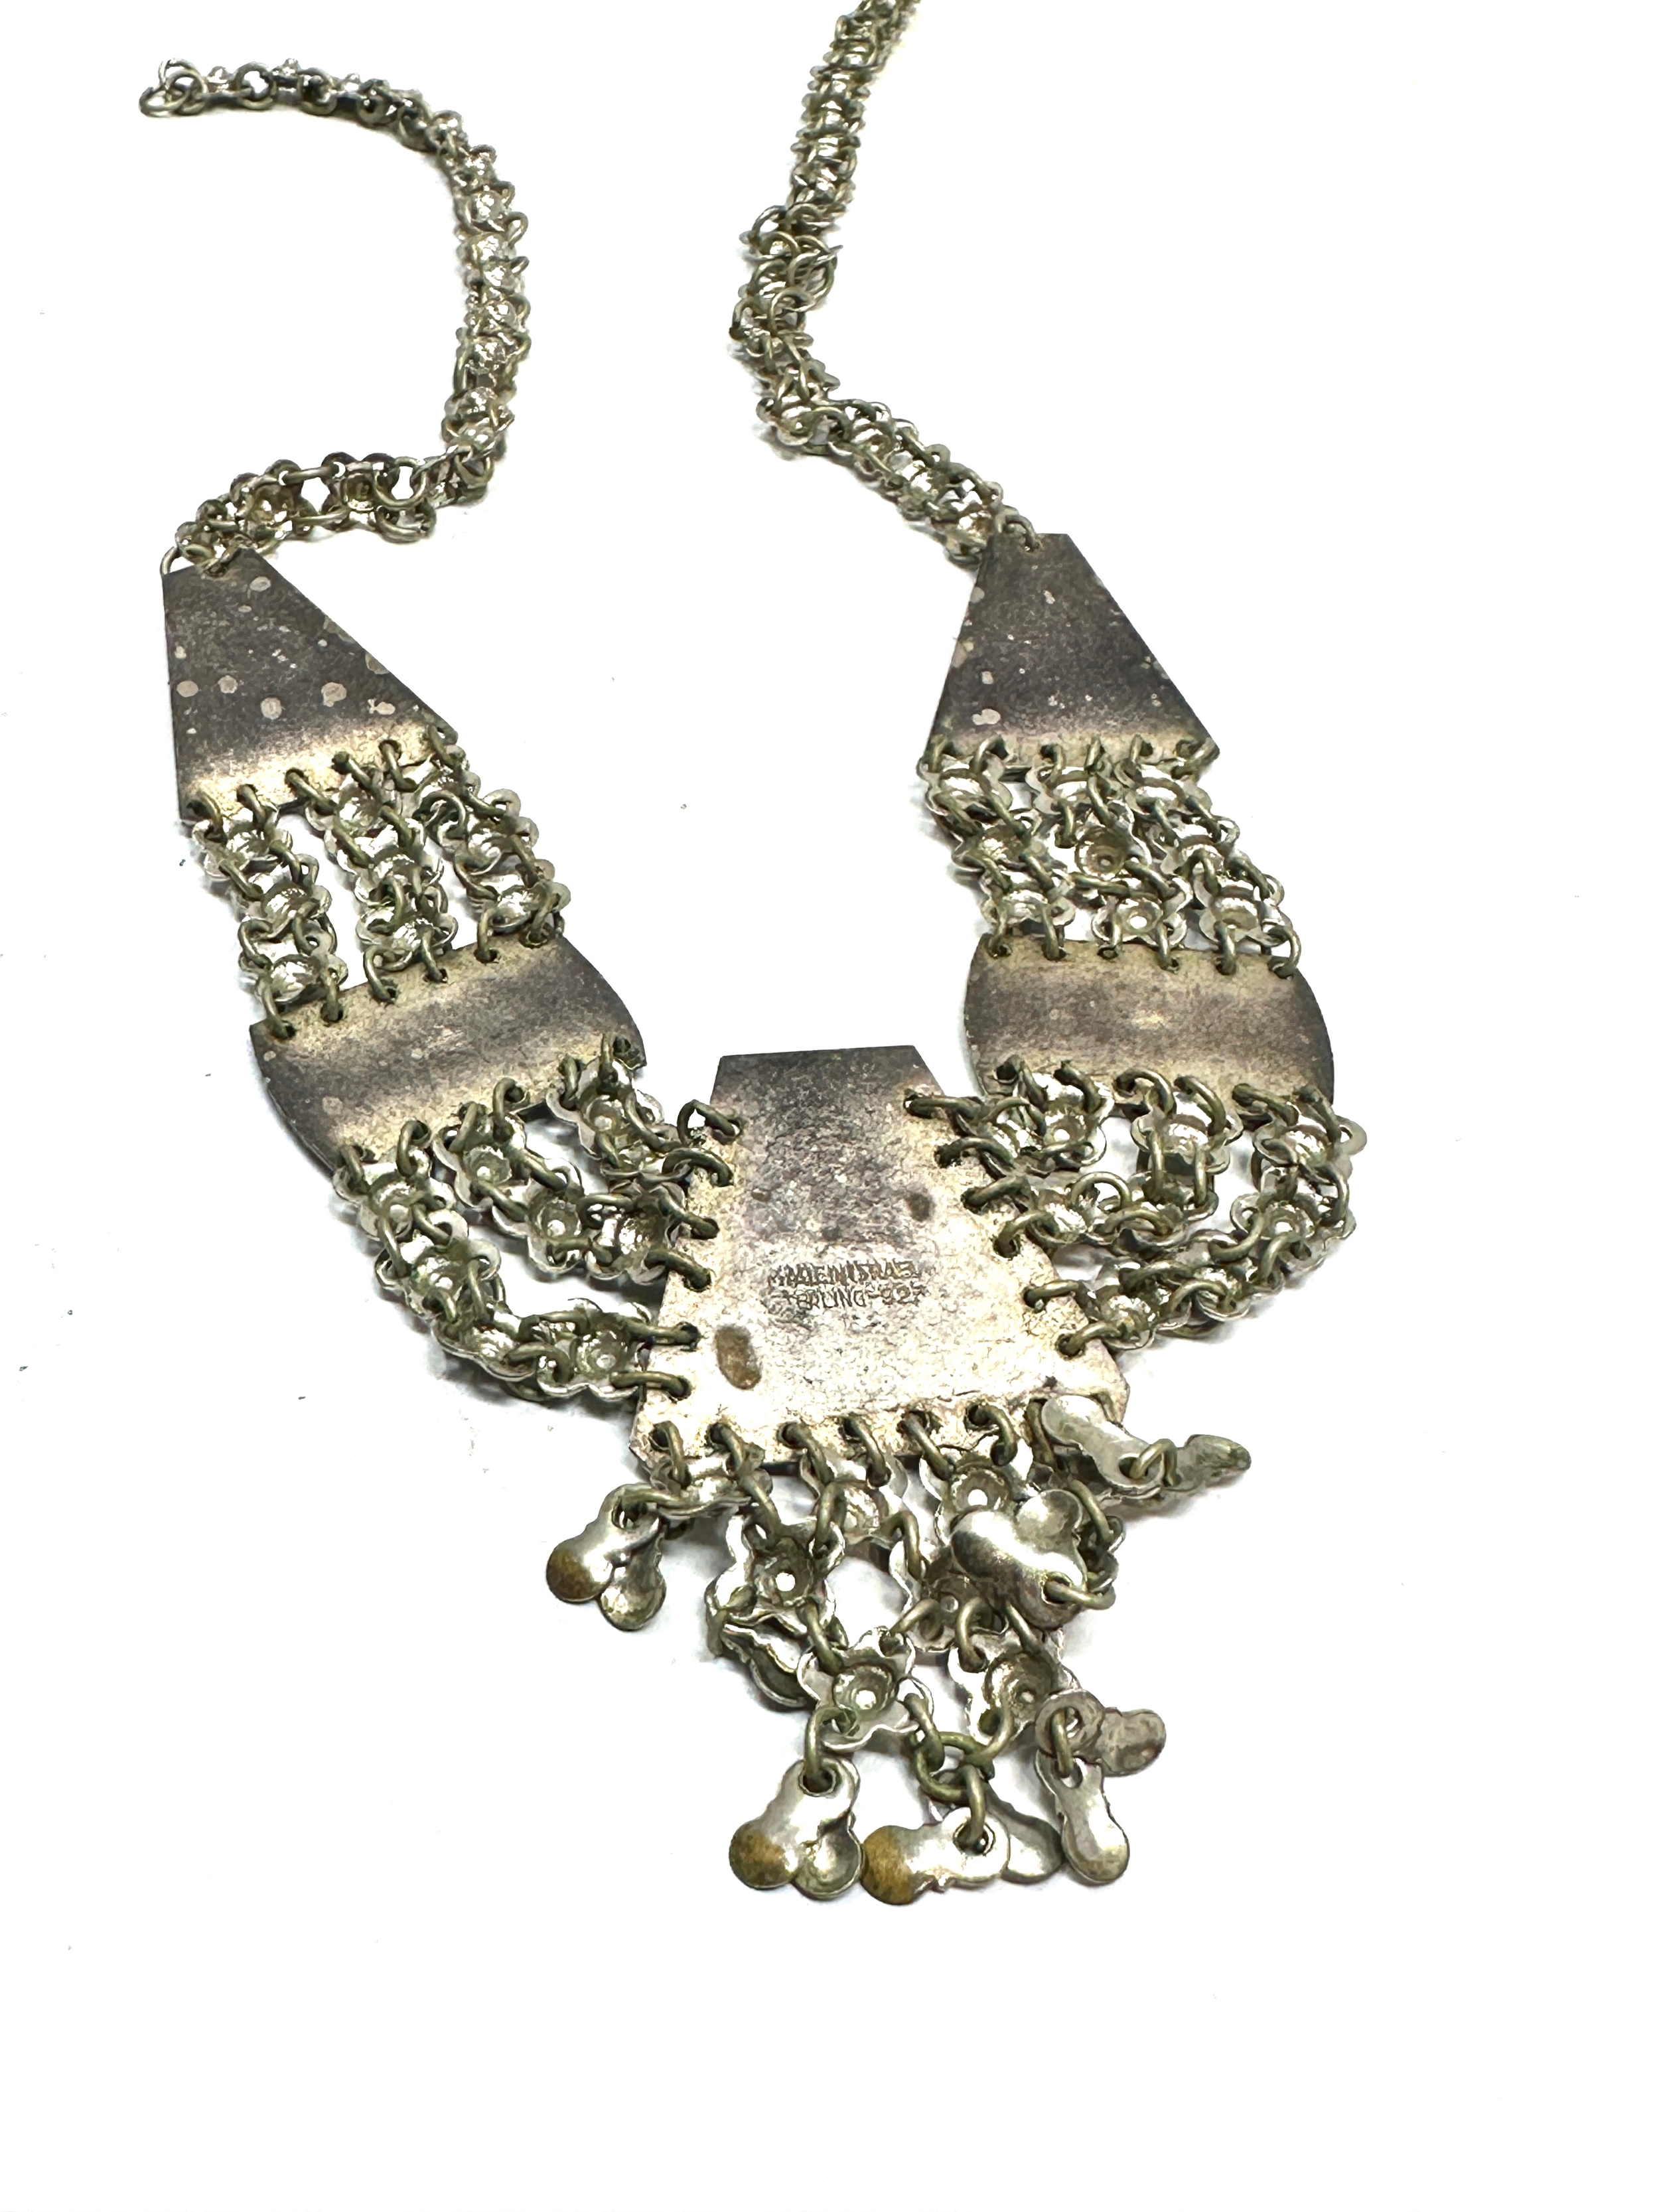 Vintage israel silver necklace weight 30g - Image 4 of 5